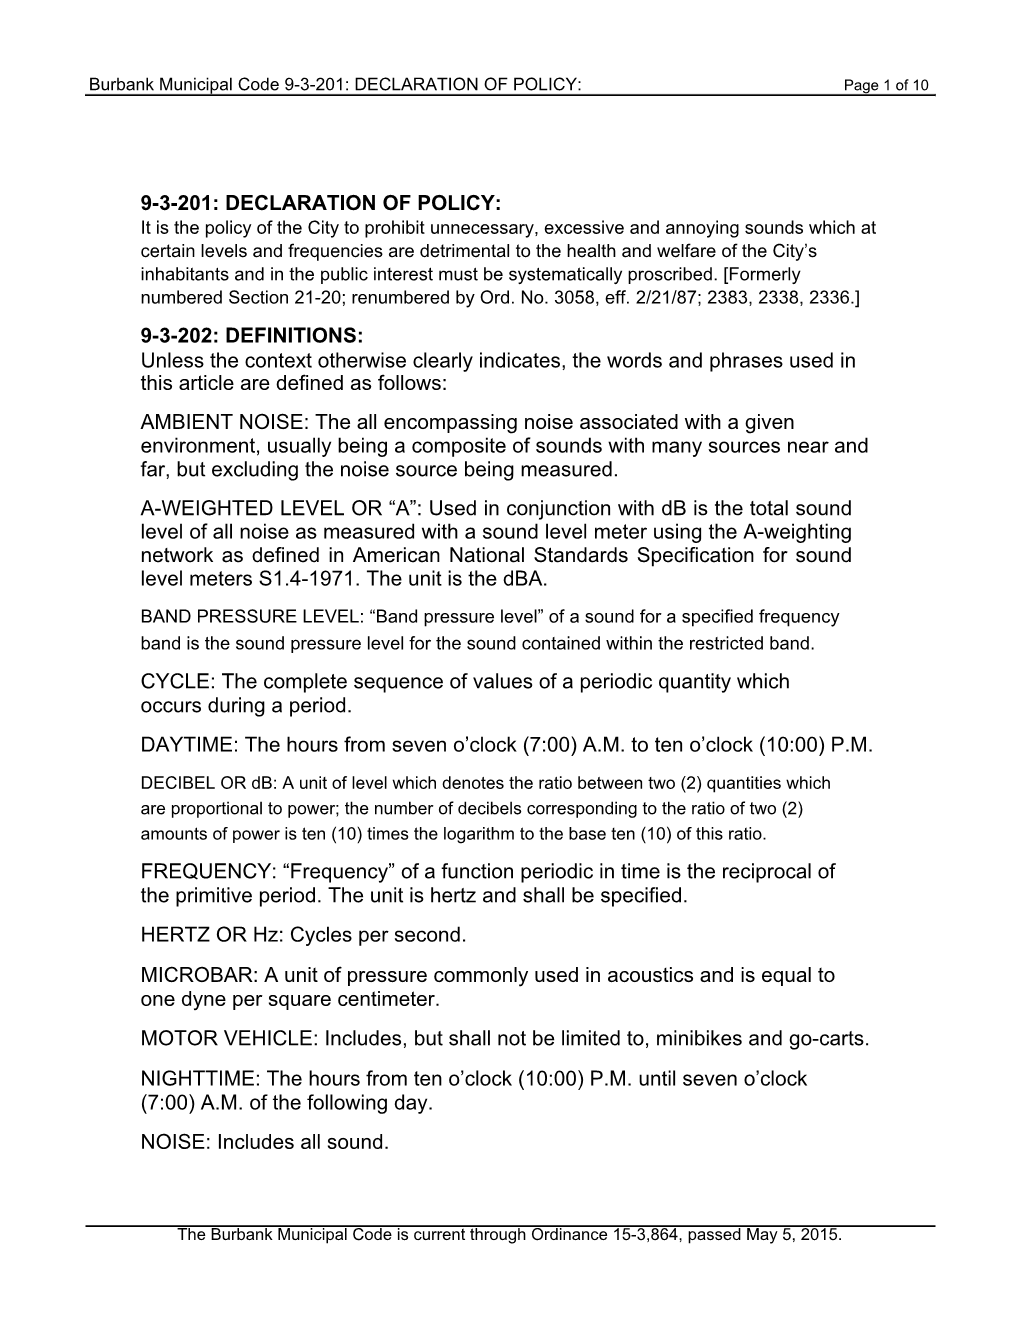 Burbank Municipal Code 9-3-201: DECLARATION of POLICY: Page 1 of 10